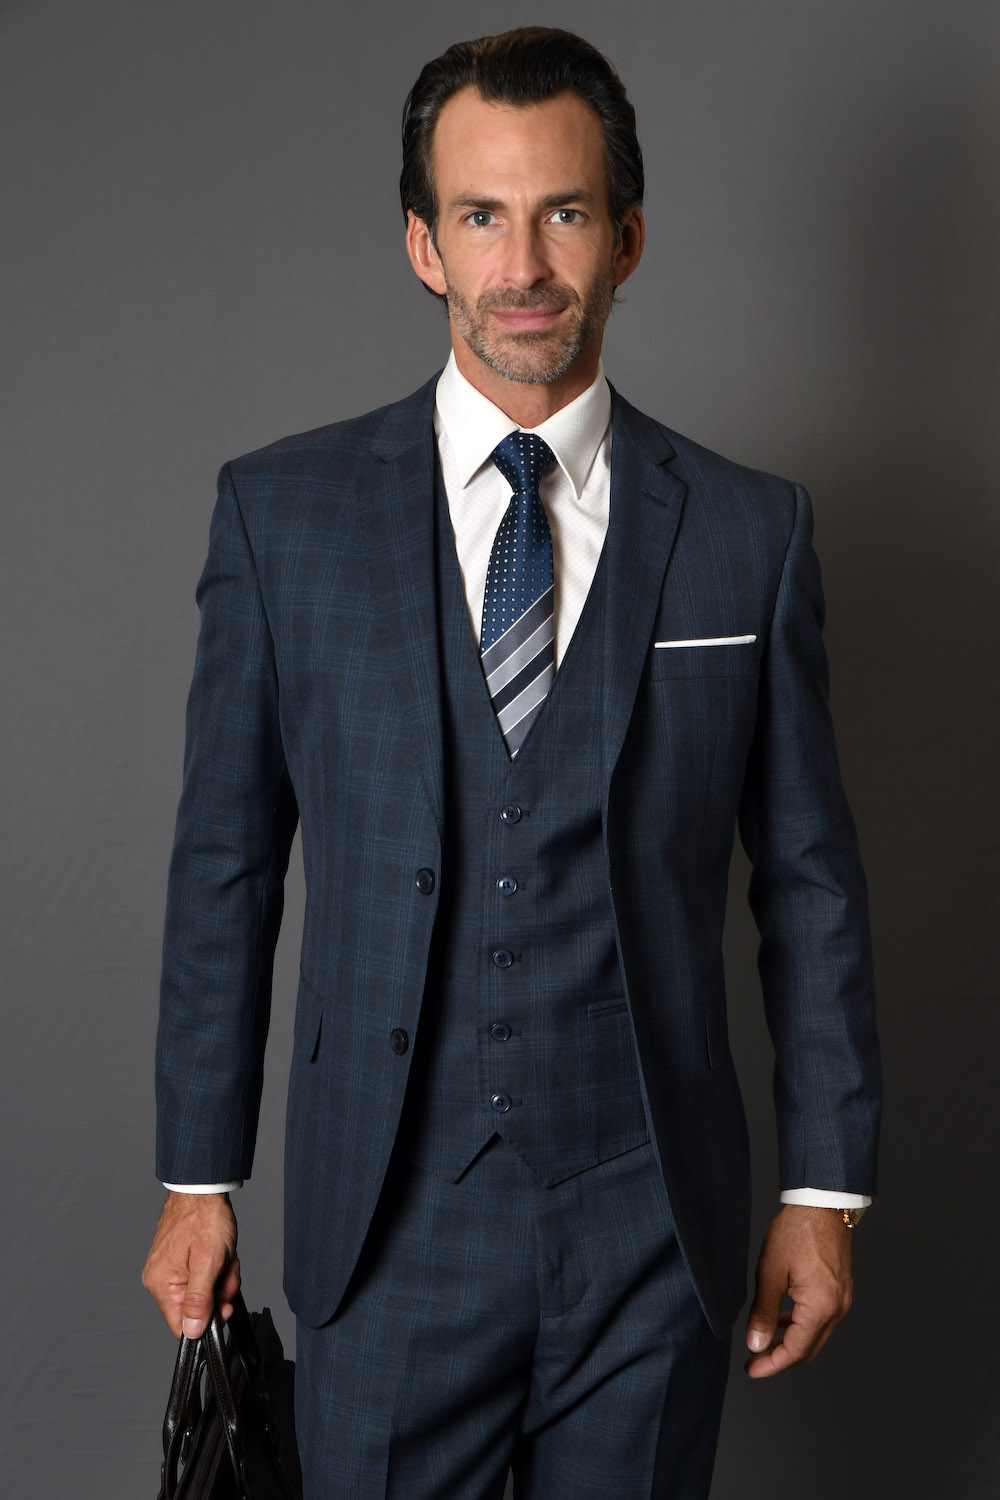 STATEMENT MANTUA-4 NAVY PLAID, TAILORED FIT SUIT 3PC, WOOL ITALY ...